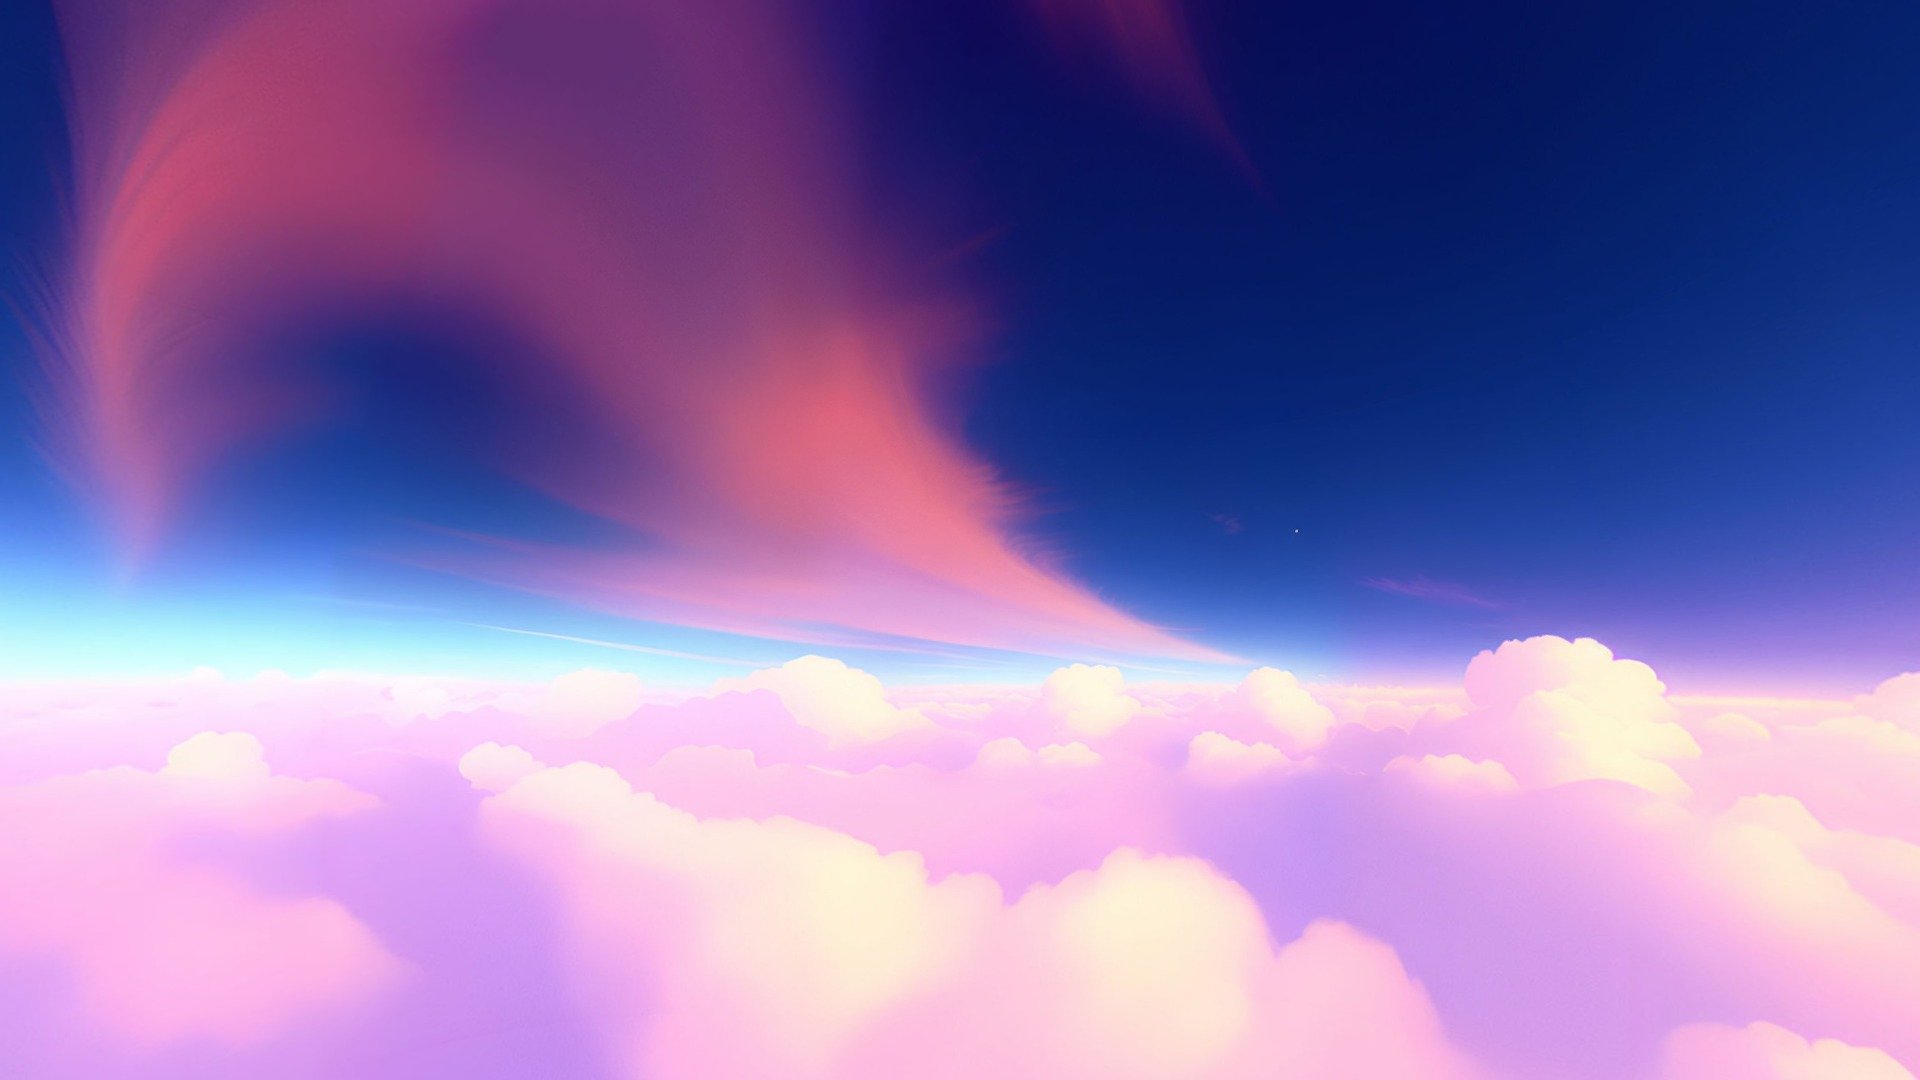 Beautiful stylized dreamy skybox. Perfect for beautiful, stylized environments and your rendering scene.

The package contains one panorama texture and one cubemap texture (png)

panorama texture: 8192 x 4096 

cubemap texture: 6144 x 4608 

Because of this size it is easier to customize more and better details if you want that. 

The sizes can be changed in your graphics program as desired

( textures are under Other available downloads)

used: AI, Photoshop

*-------------Terms of Use--------------

Commercial use of the assets provided is permitted but cannot be included in an asset pack or sold at any sort of asset/resource marketplace or be shared for free* - Stylized Cloudy Sky 013 - Buy Royalty Free 3D model by stylized skybox (@skybox_) 3d model